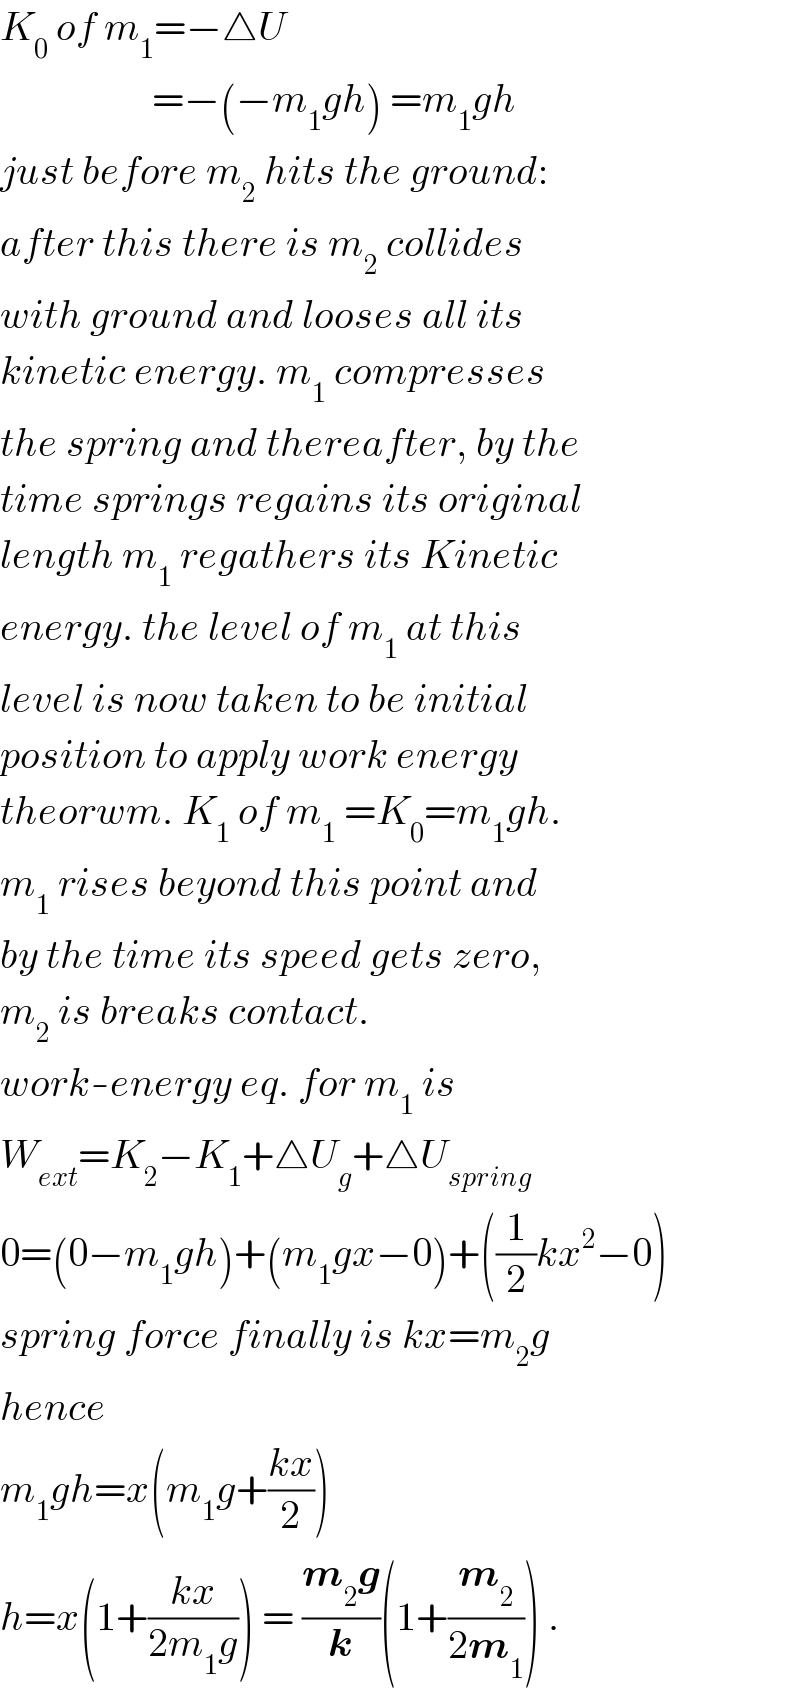 K_0  of m_1 =−△U                     =−(−m_1 gh) =m_1 gh  just before m_2  hits the ground:  after this there is m_2  collides  with ground and looses all its  kinetic energy. m_1  compresses  the spring and thereafter, by the  time springs regains its original  length m_1  regathers its Kinetic  energy. the level of m_1  at this  level is now taken to be initial  position to apply work energy  theorwm. K_1  of m_1  =K_0 =m_1 gh.  m_1  rises beyond this point and  by the time its speed gets zero,  m_2  is breaks contact.  work-energy eq. for m_1  is  W_(ext) =K_2 −K_1 +△U_g +△U_(spring)   0=(0−m_1 gh)+(m_1 gx−0)+((1/2)kx^2 −0)  spring force finally is kx=m_2 g  hence  m_1 gh=x(m_1 g+((kx)/2))  h=x(1+((kx)/(2m_1 g))) = ((m_2 g)/k)(1+(m_2 /(2m_1 ))) .  